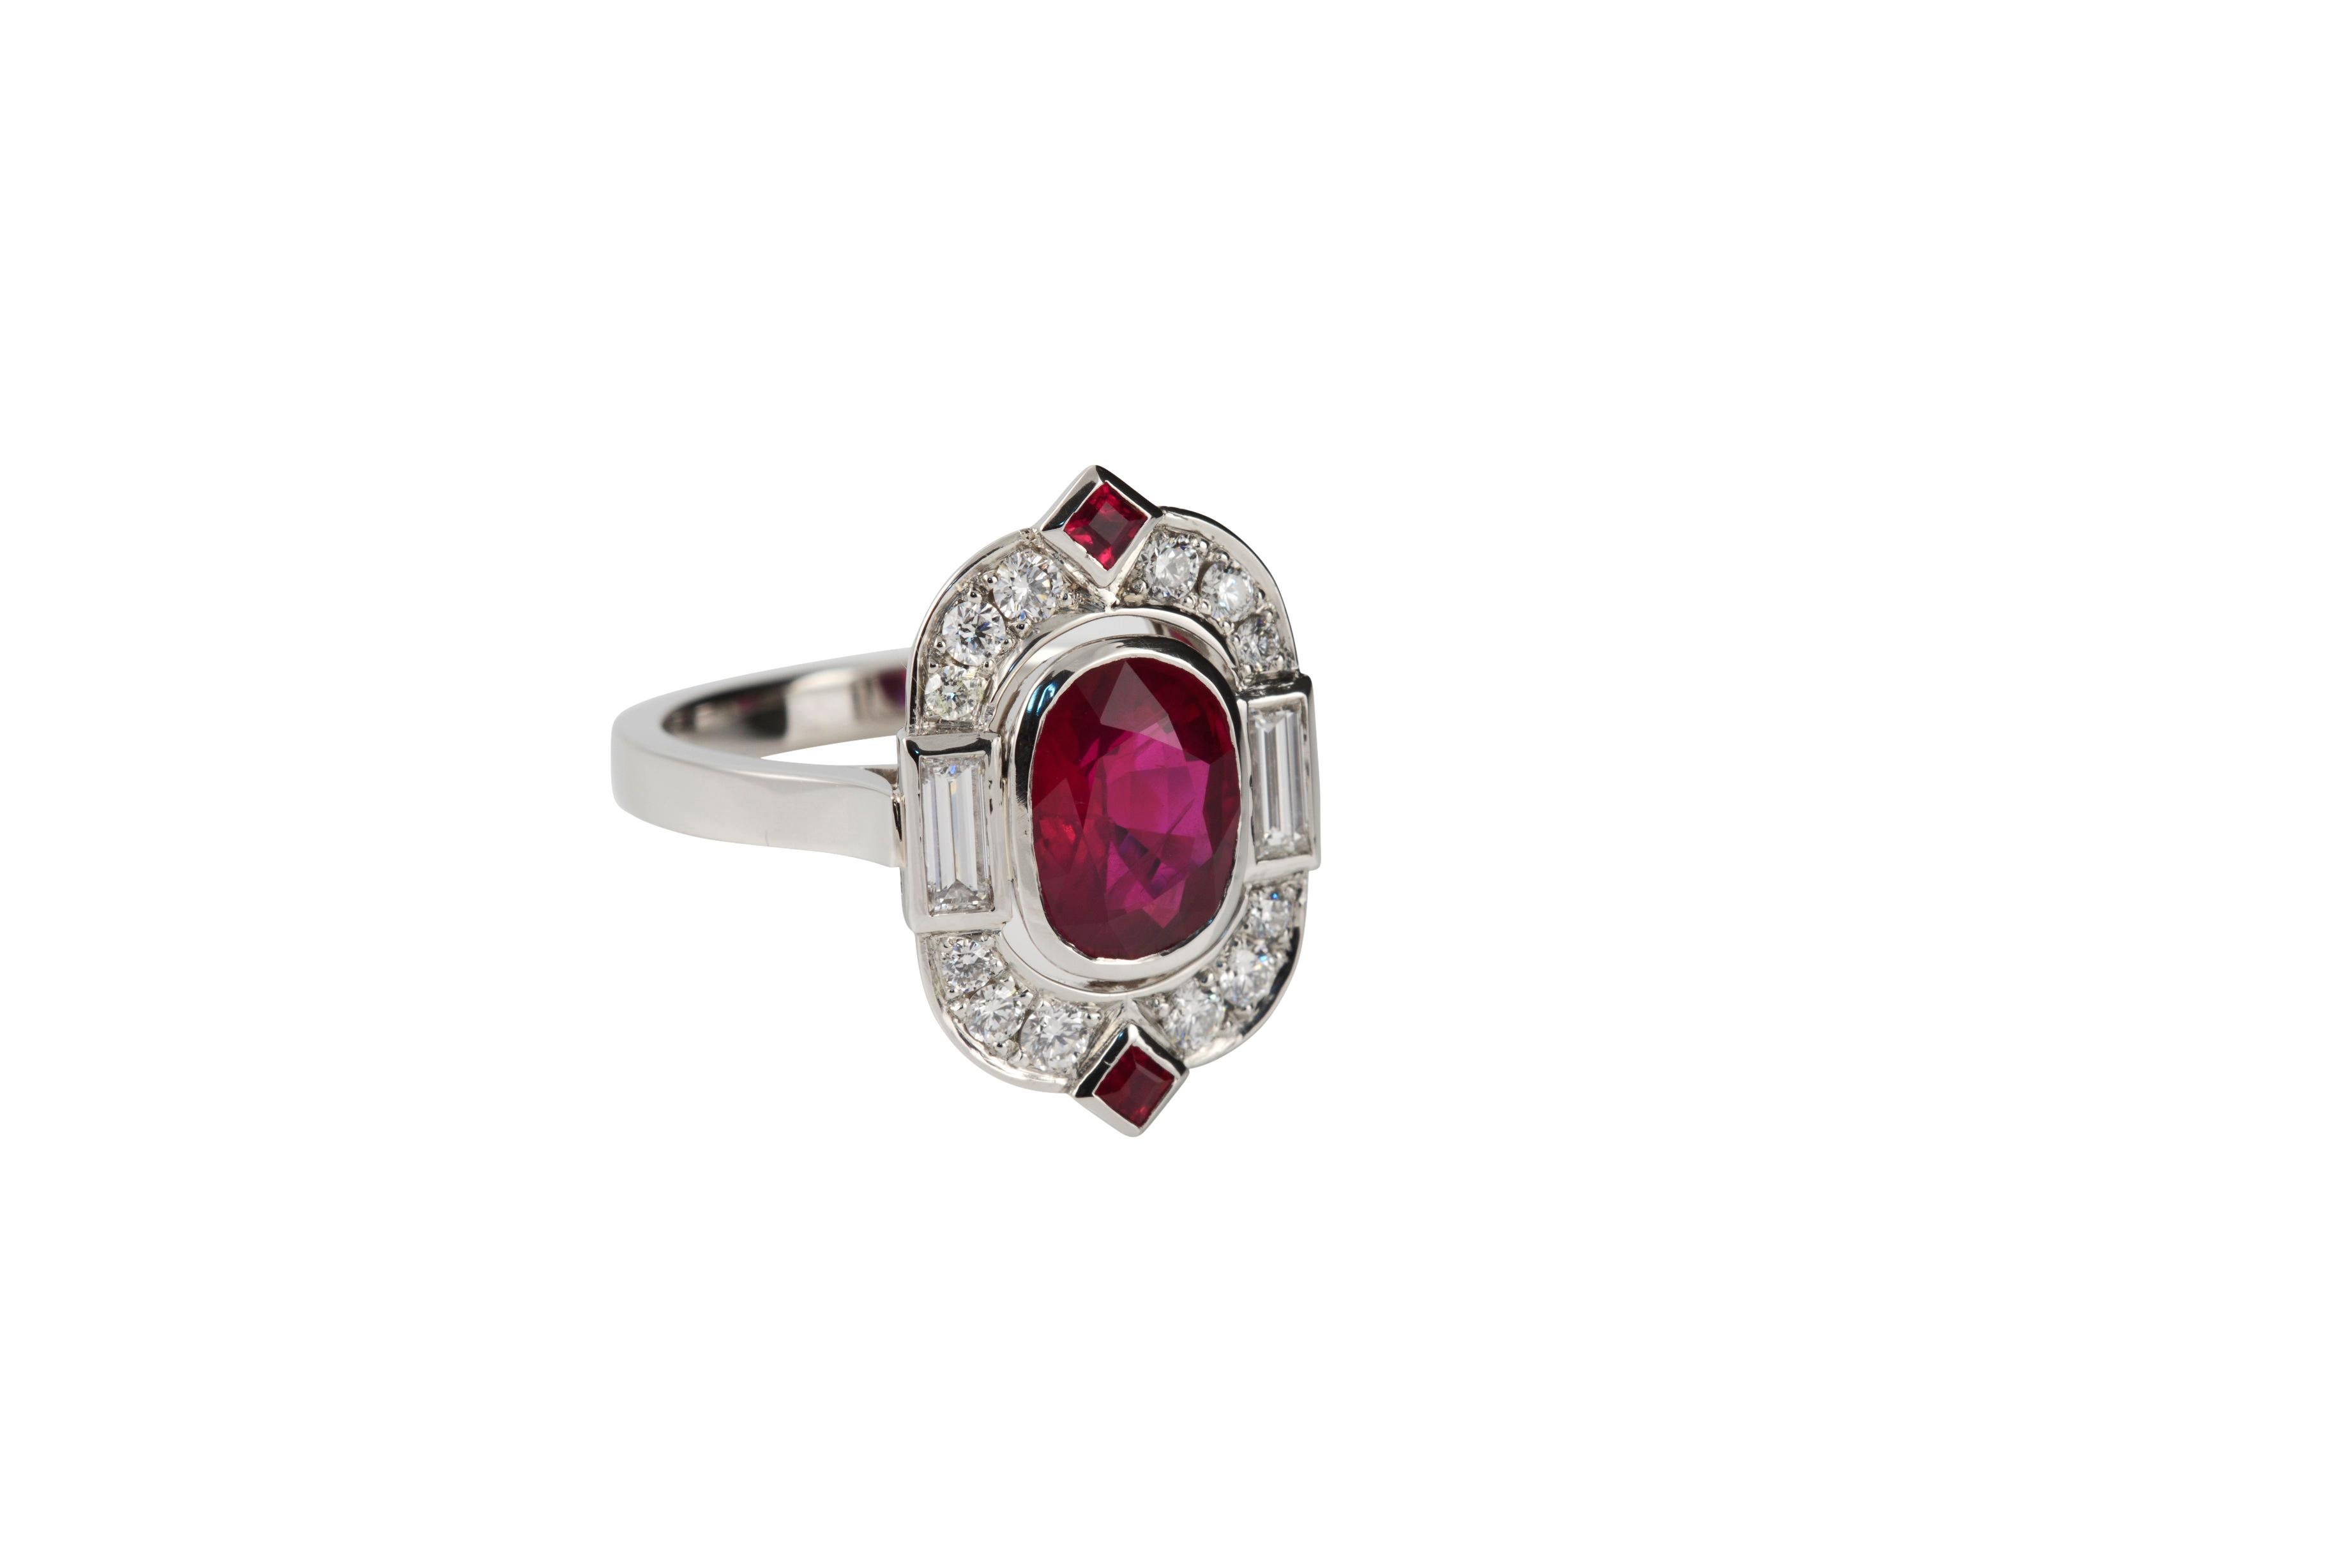 Nicky Burles has long been inspired by Art Deco fine jewellery, this beautiful, handmade, 18 karat white gold tablet ring pays homage to this classic period. A rare, natural Burmese ruby of 3.02 carats sits sparkling in the centre of the table. The